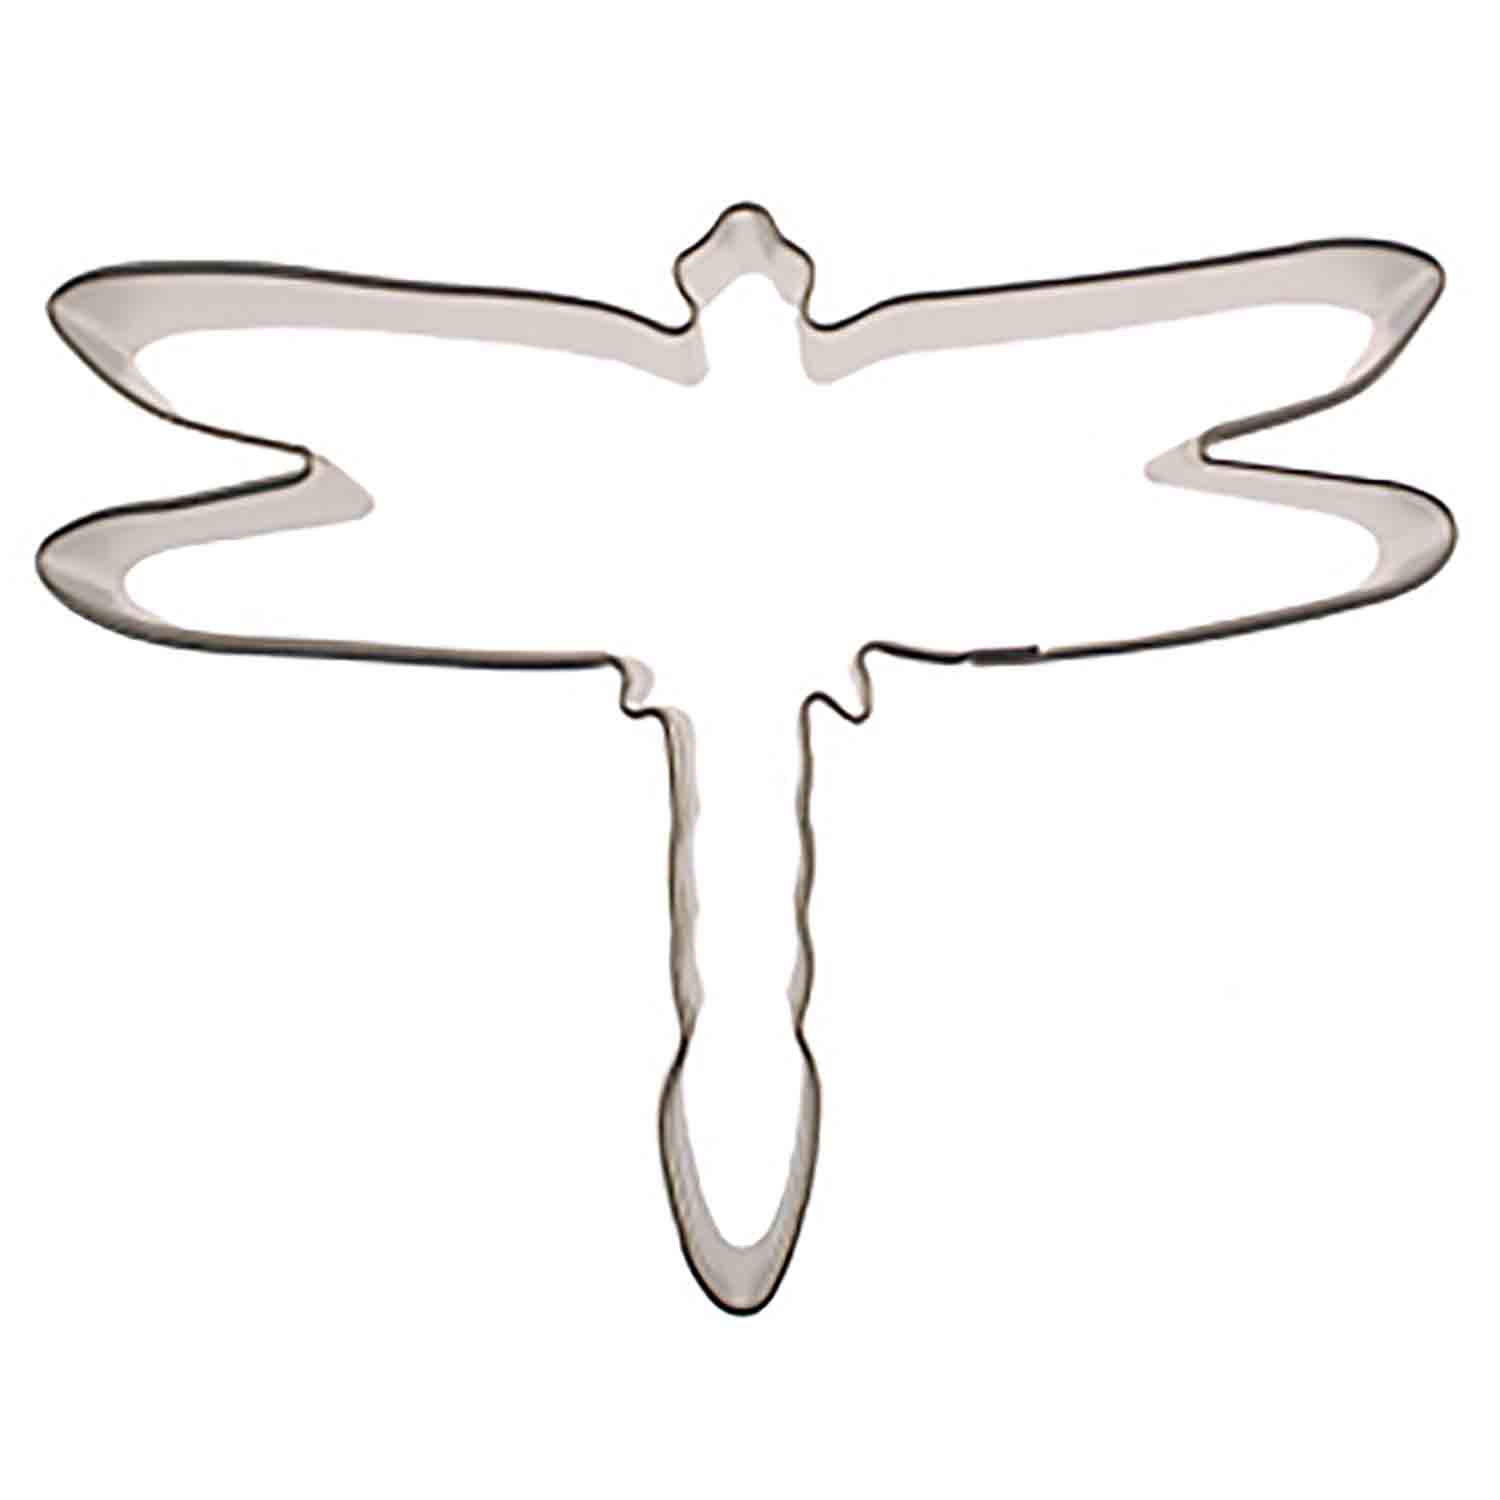 Dragonfly Cookie Cutter #2